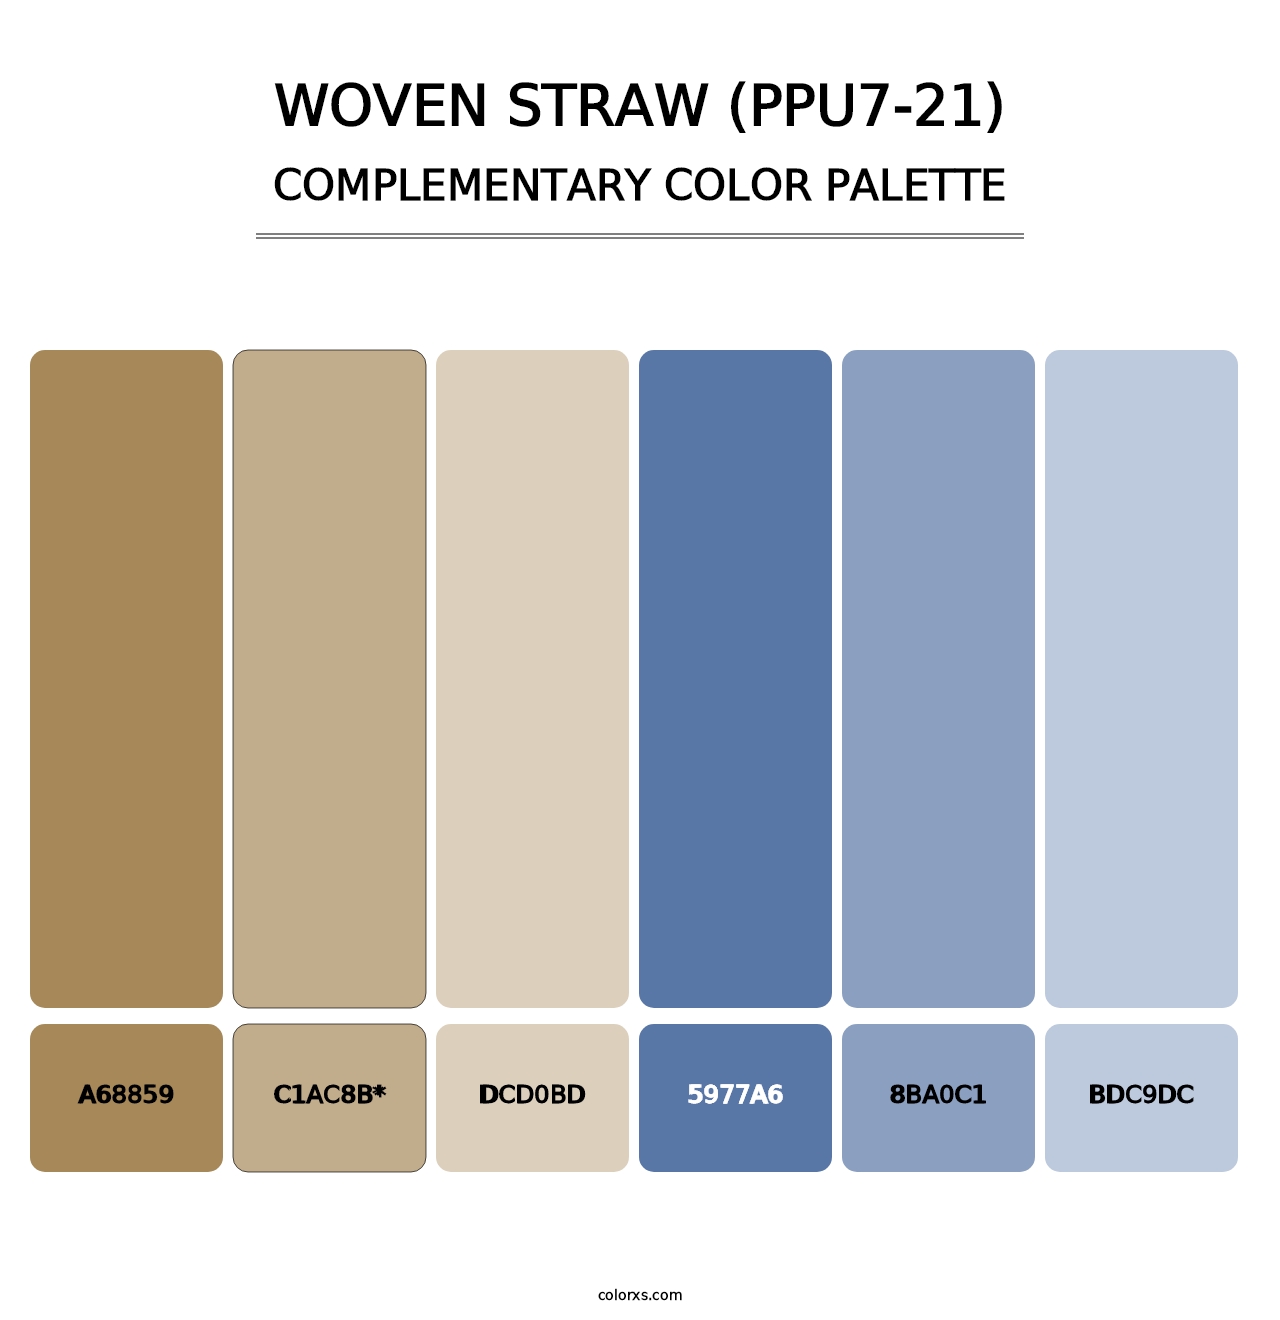 Woven Straw (PPU7-21) - Complementary Color Palette